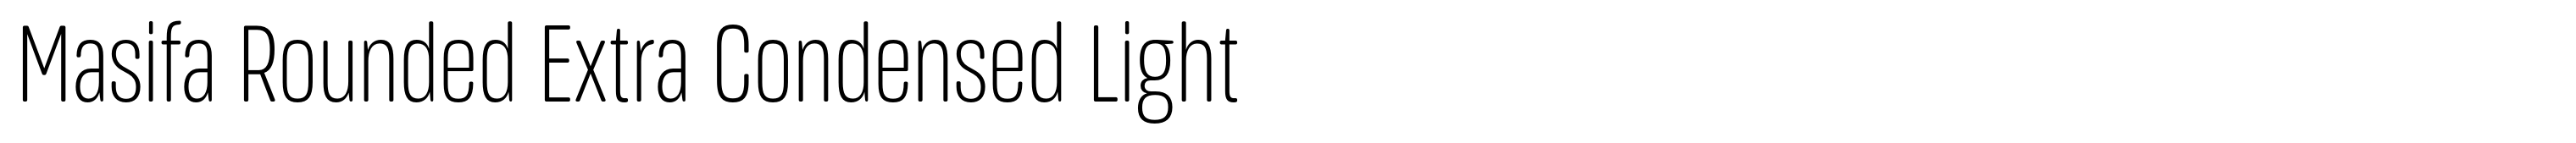 Masifa Rounded Extra Condensed Light